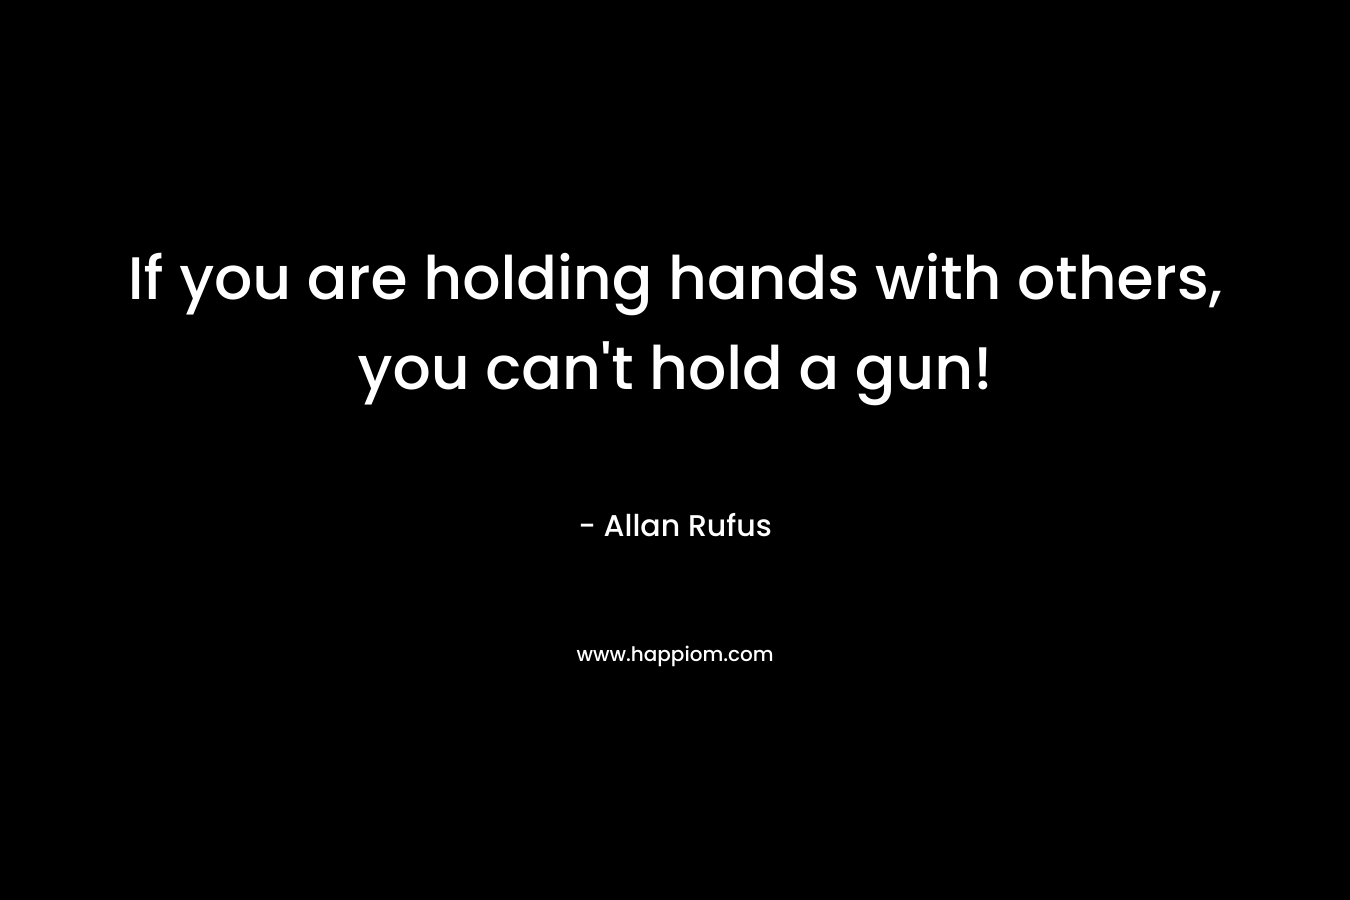 If you are holding hands with others, you can’t hold a gun! – Allan Rufus